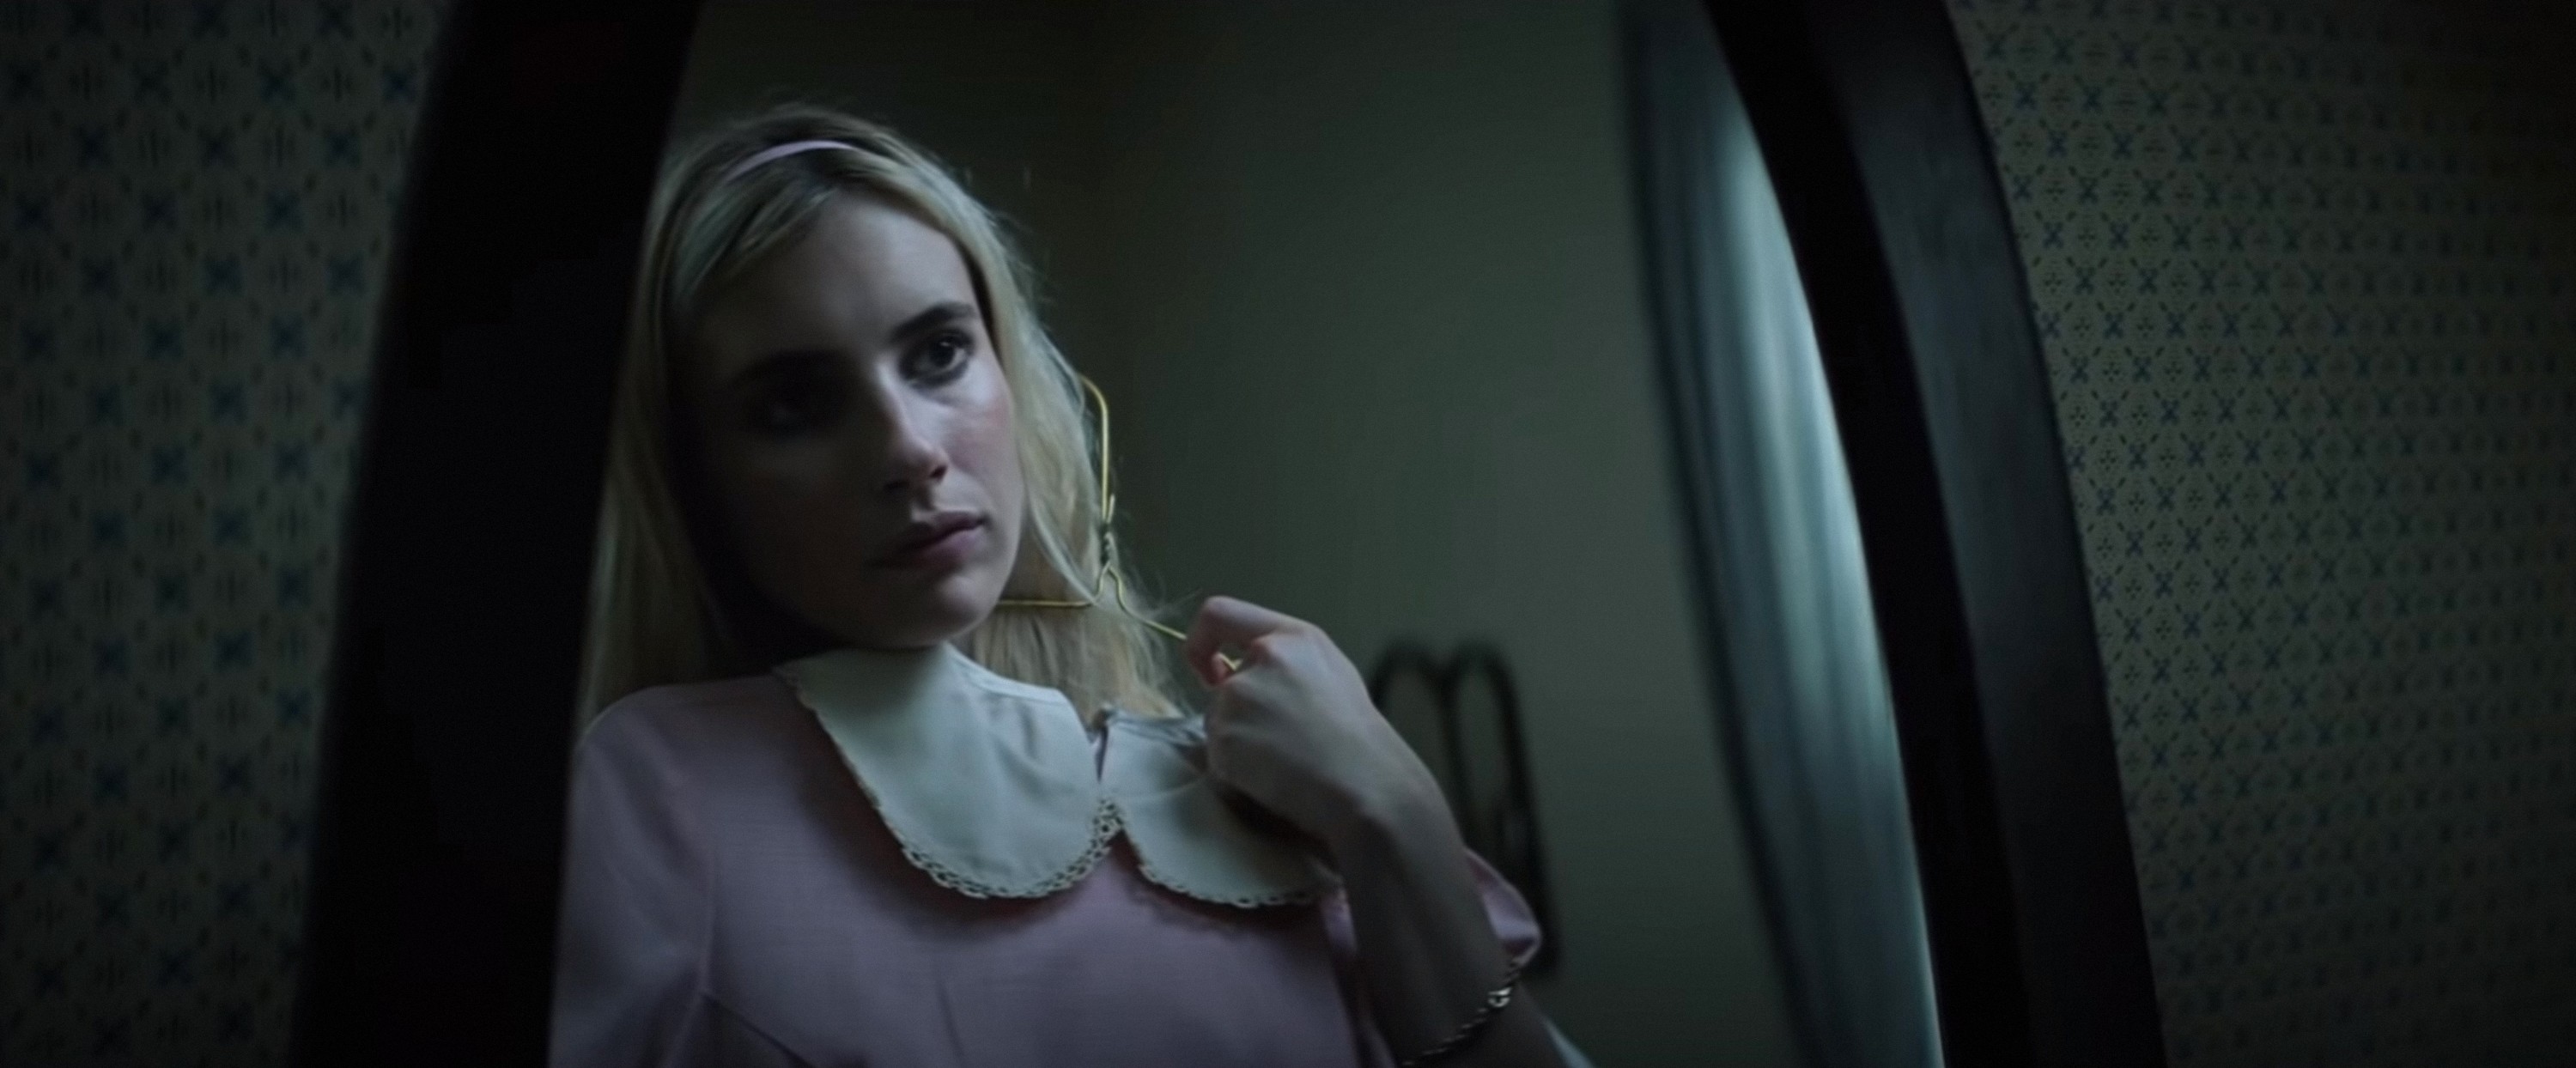 Emma roberts in the movie abandoned.